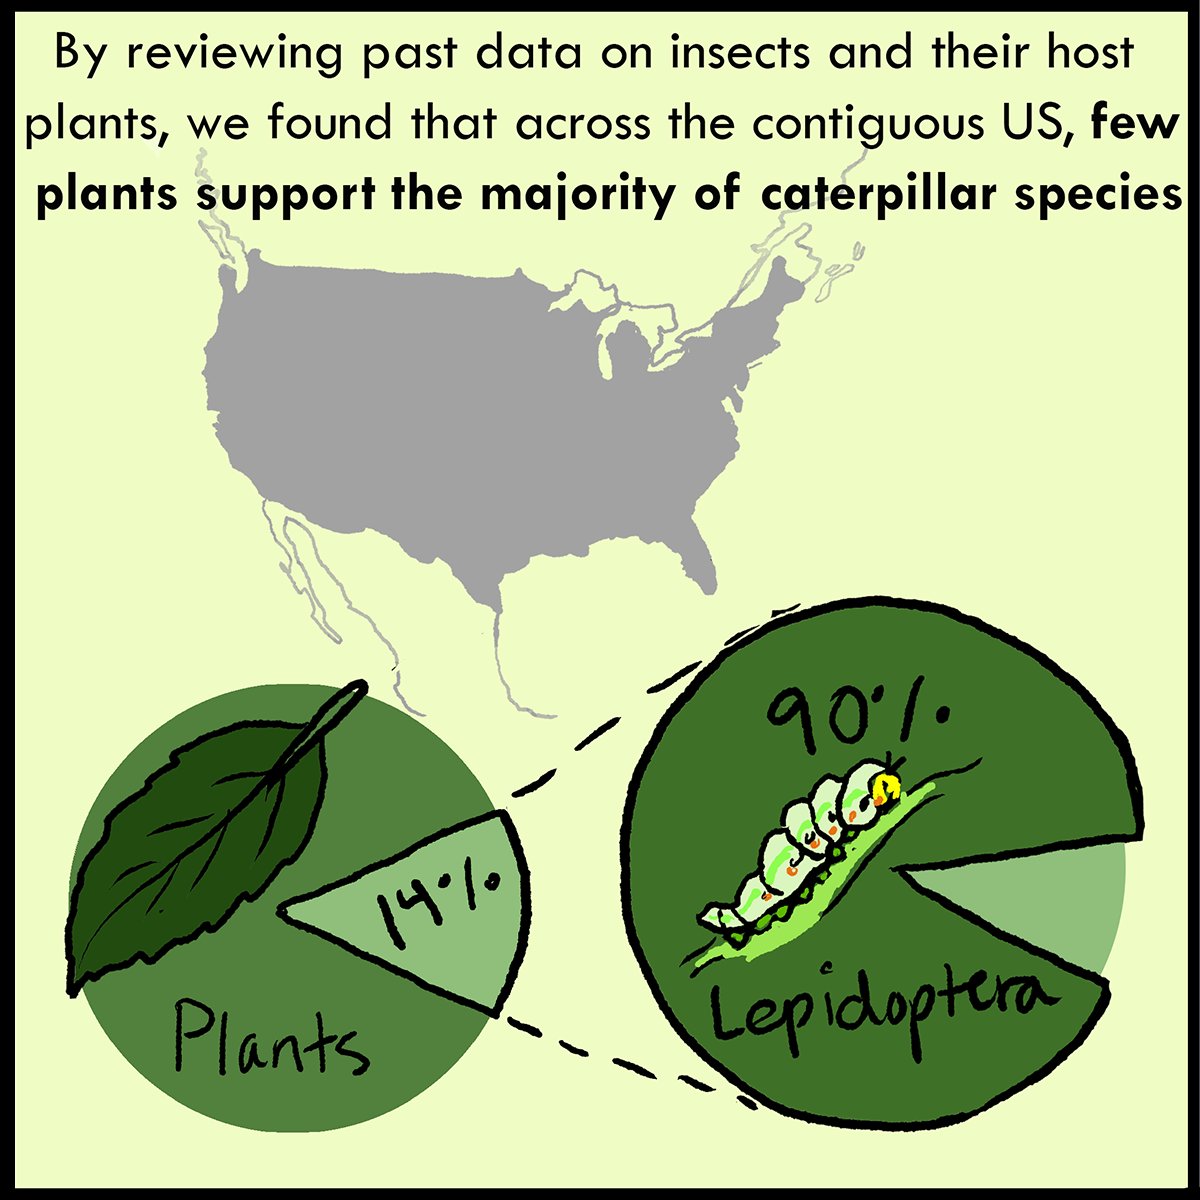 What we found was surprising: across the US, ~14% of plant genera are supporting >90% of Lepidoptera species!Plus, across ecosystems, distributions of interactions were consistently skewed, with few plants supporting the lion’s share of Lepidoptera species in a given region